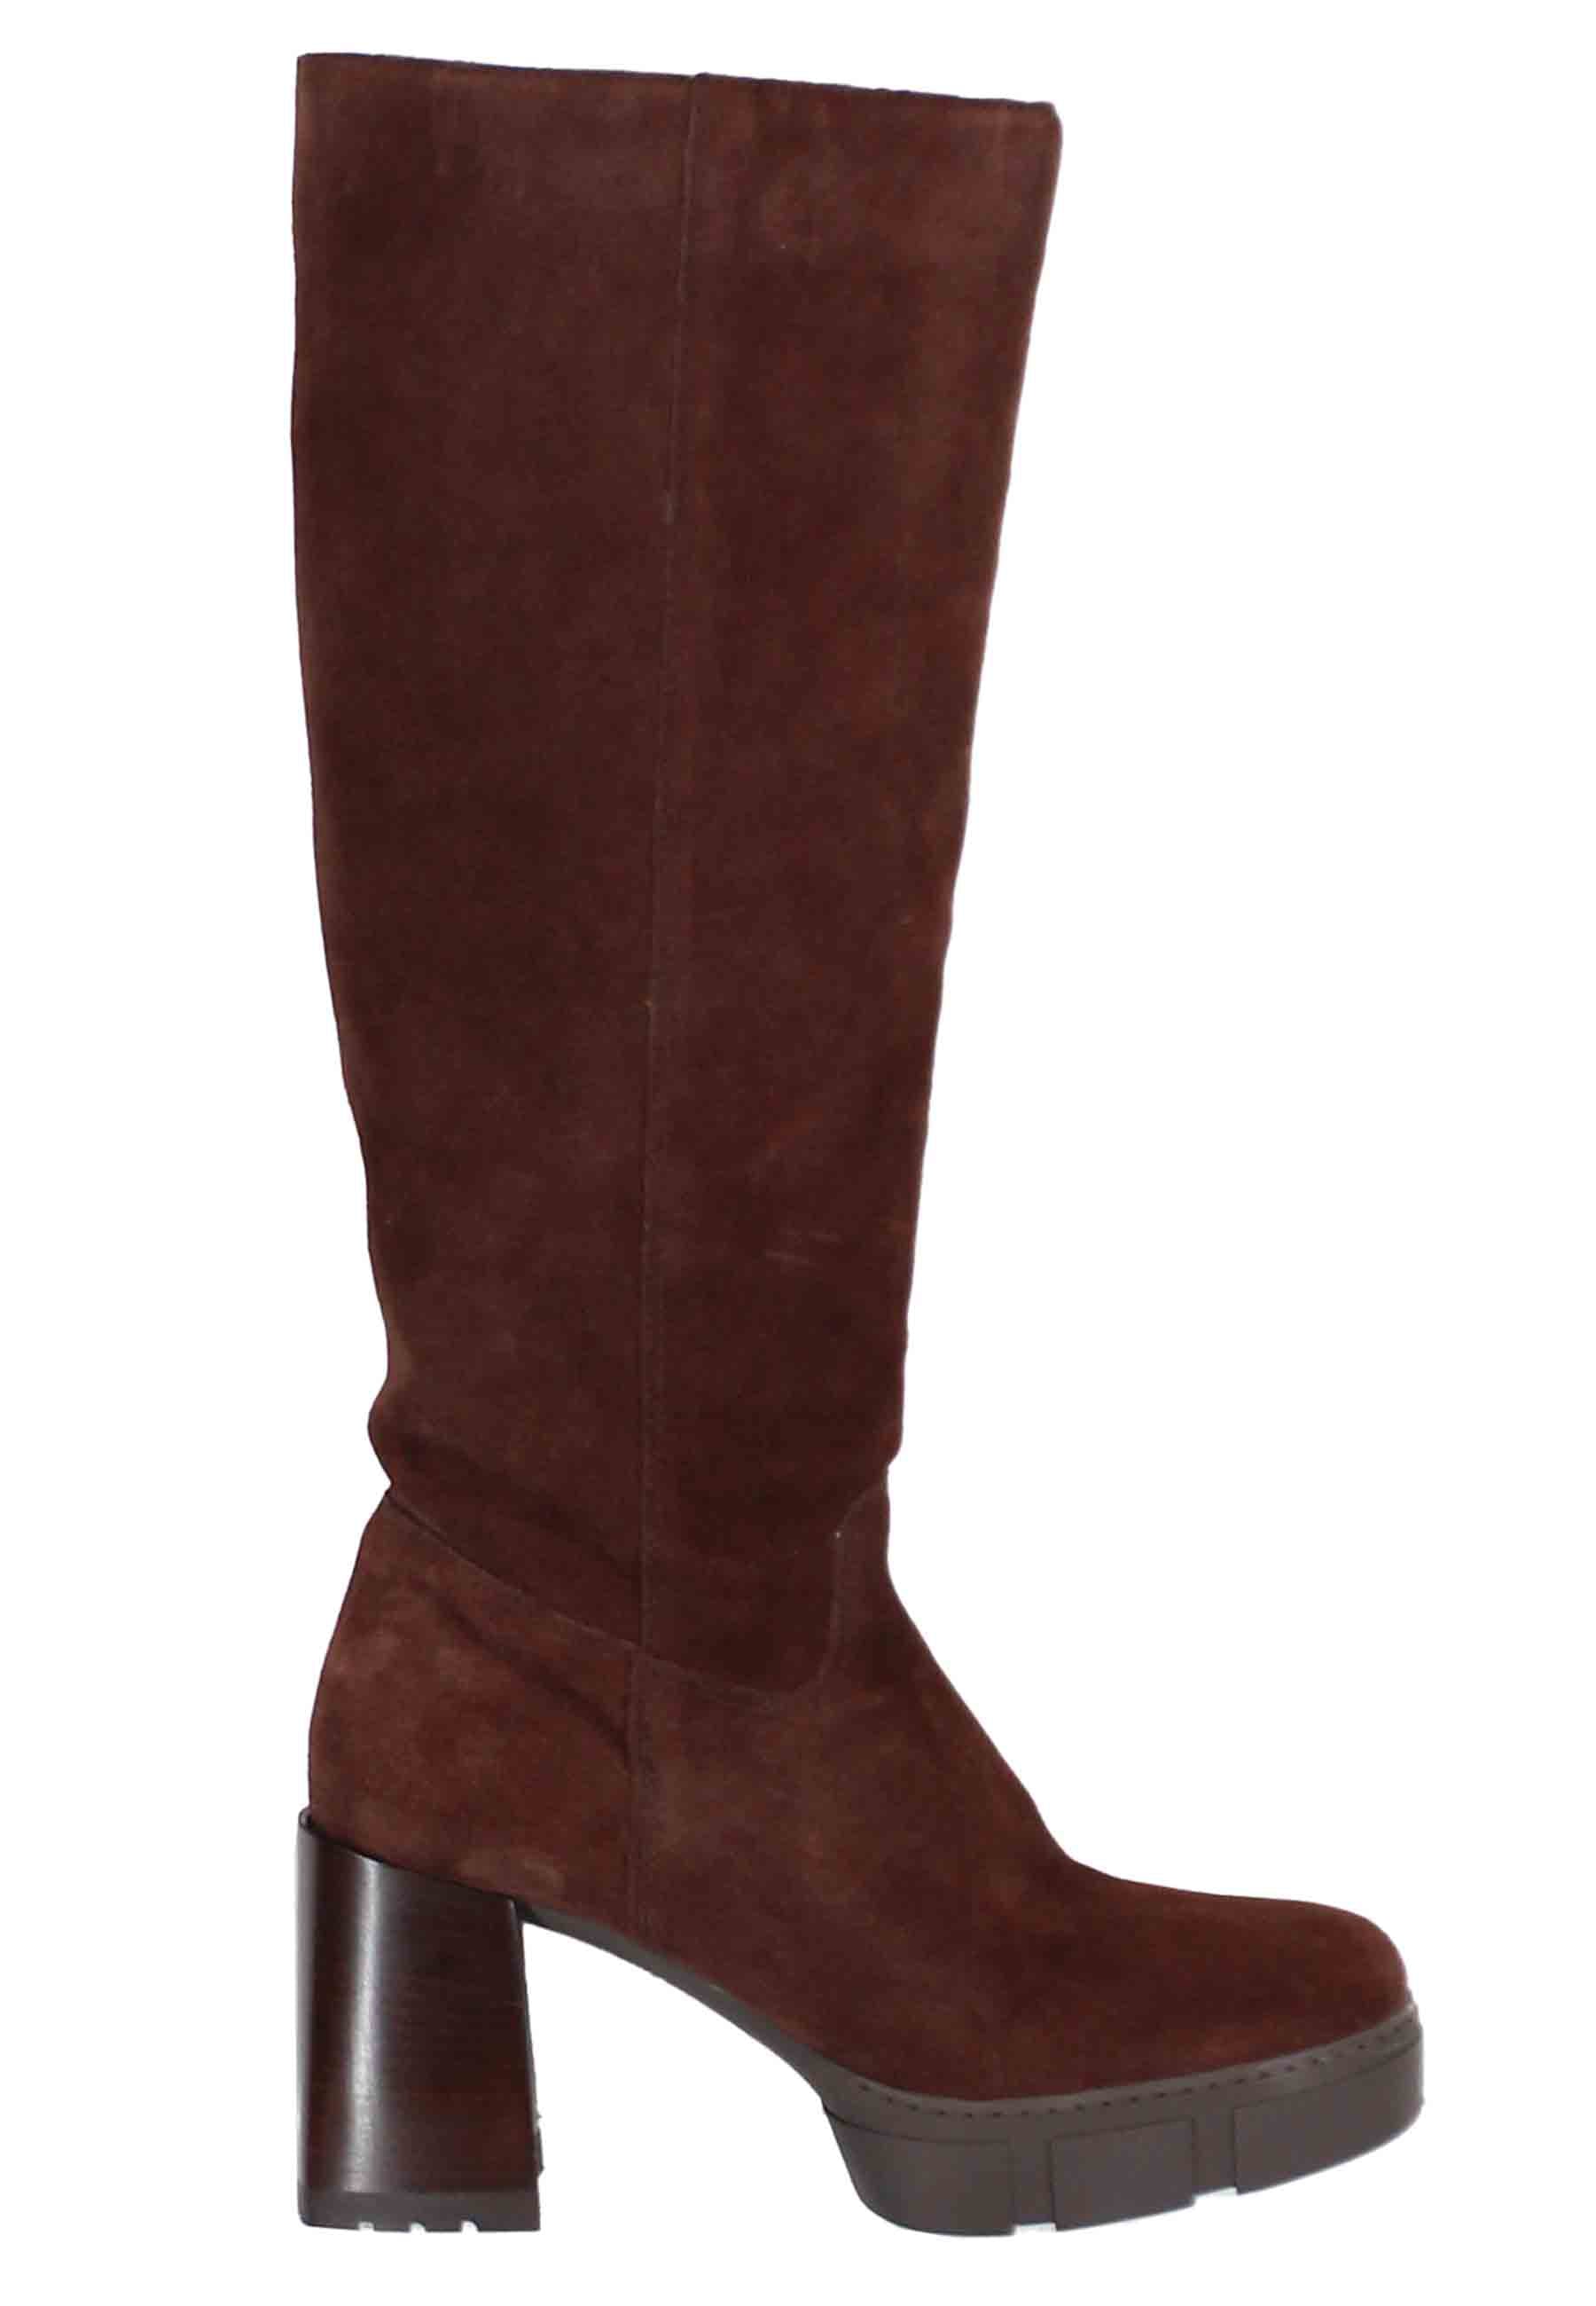 Women's tube boots in brown suede with heel and platform